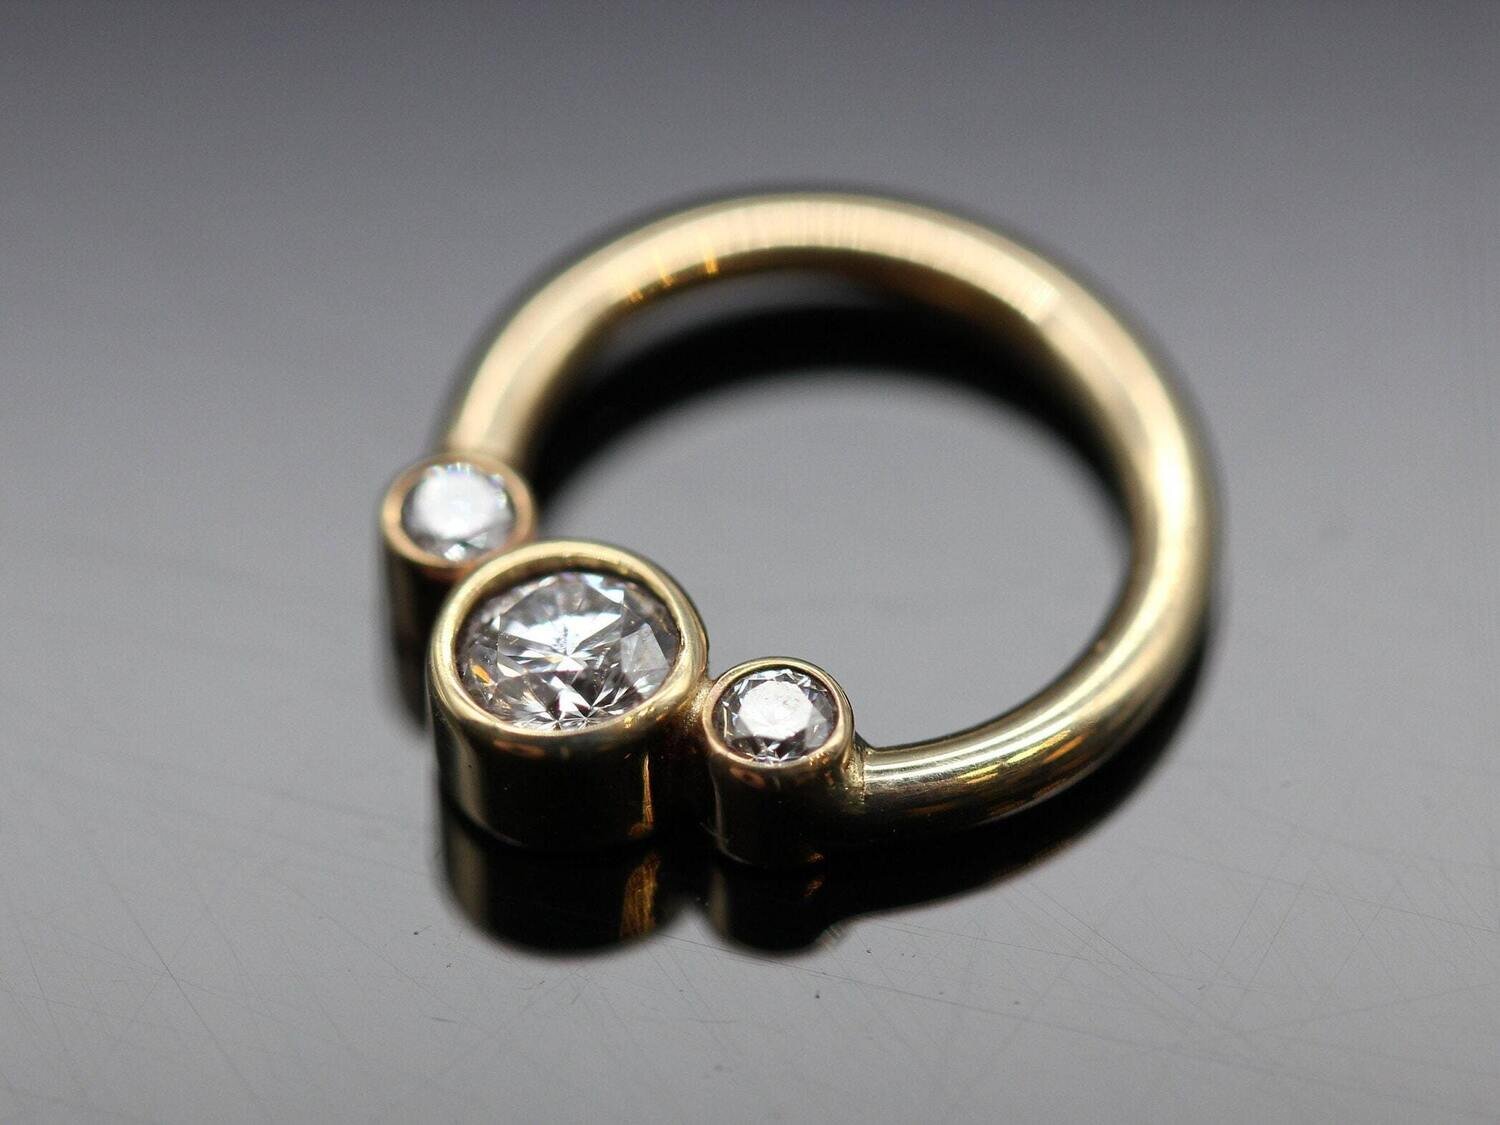 16g or 18g Solid 14k Gold (NOT plated or filled) With Three real Diamonds